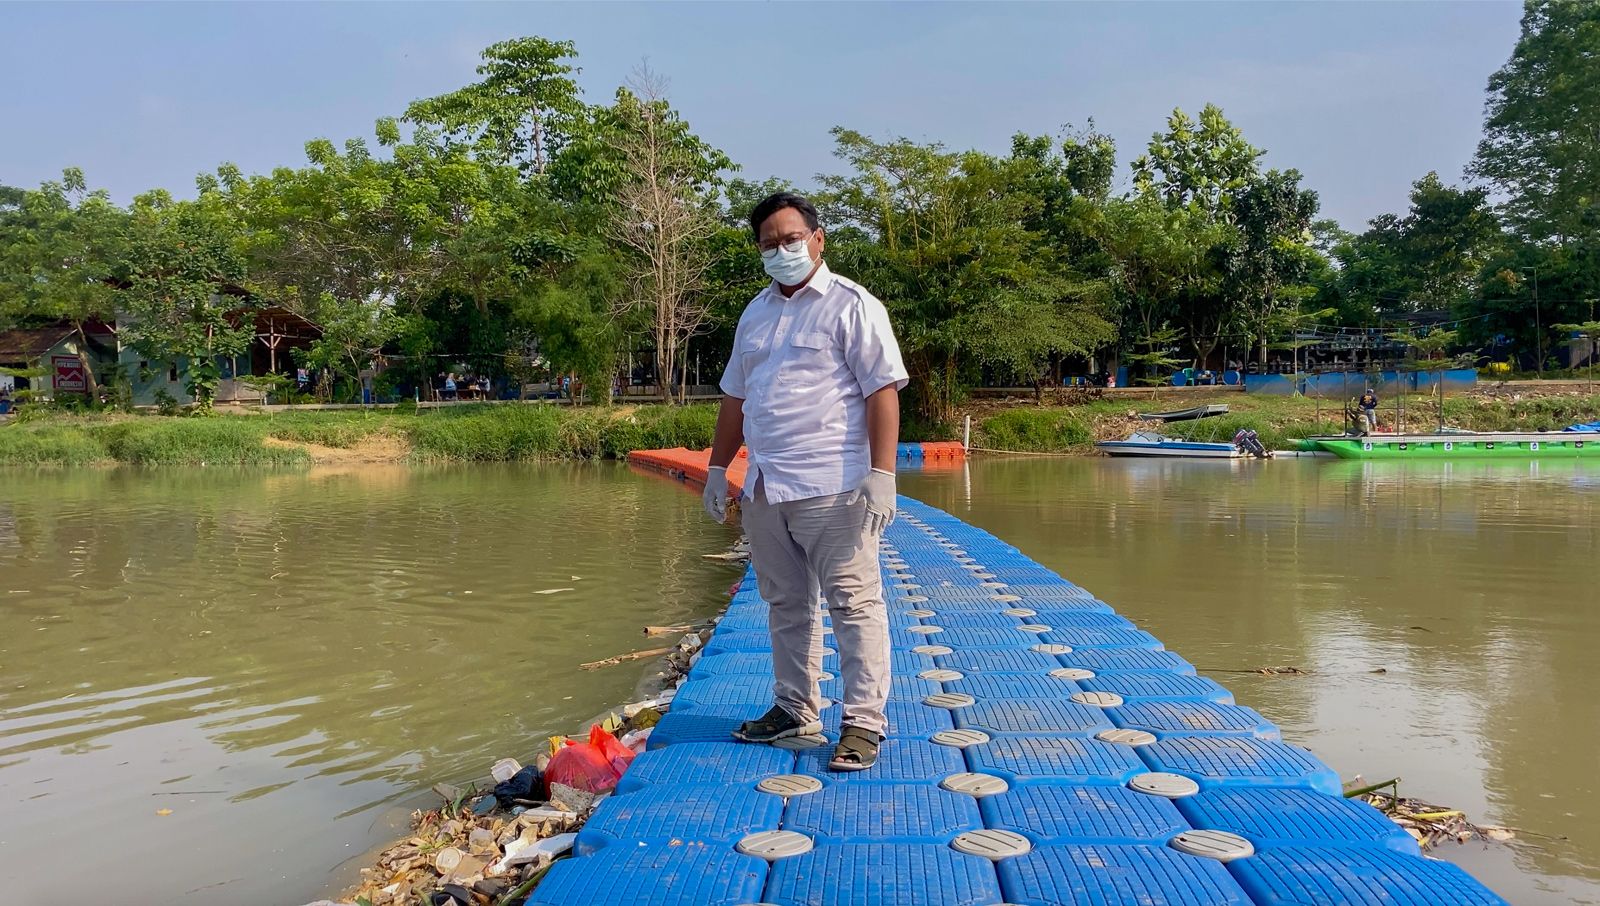 Ade Yunus, founder of environmental organisation Bank Sampah Sungai Cisadane (Cisadane River Waste Bank) or Banksasuci, stands on a floating boom used to collect waste from the Cisadane River in Tangerang, Indonesia. Image by Adi Renaldi. Indonesia, undated.